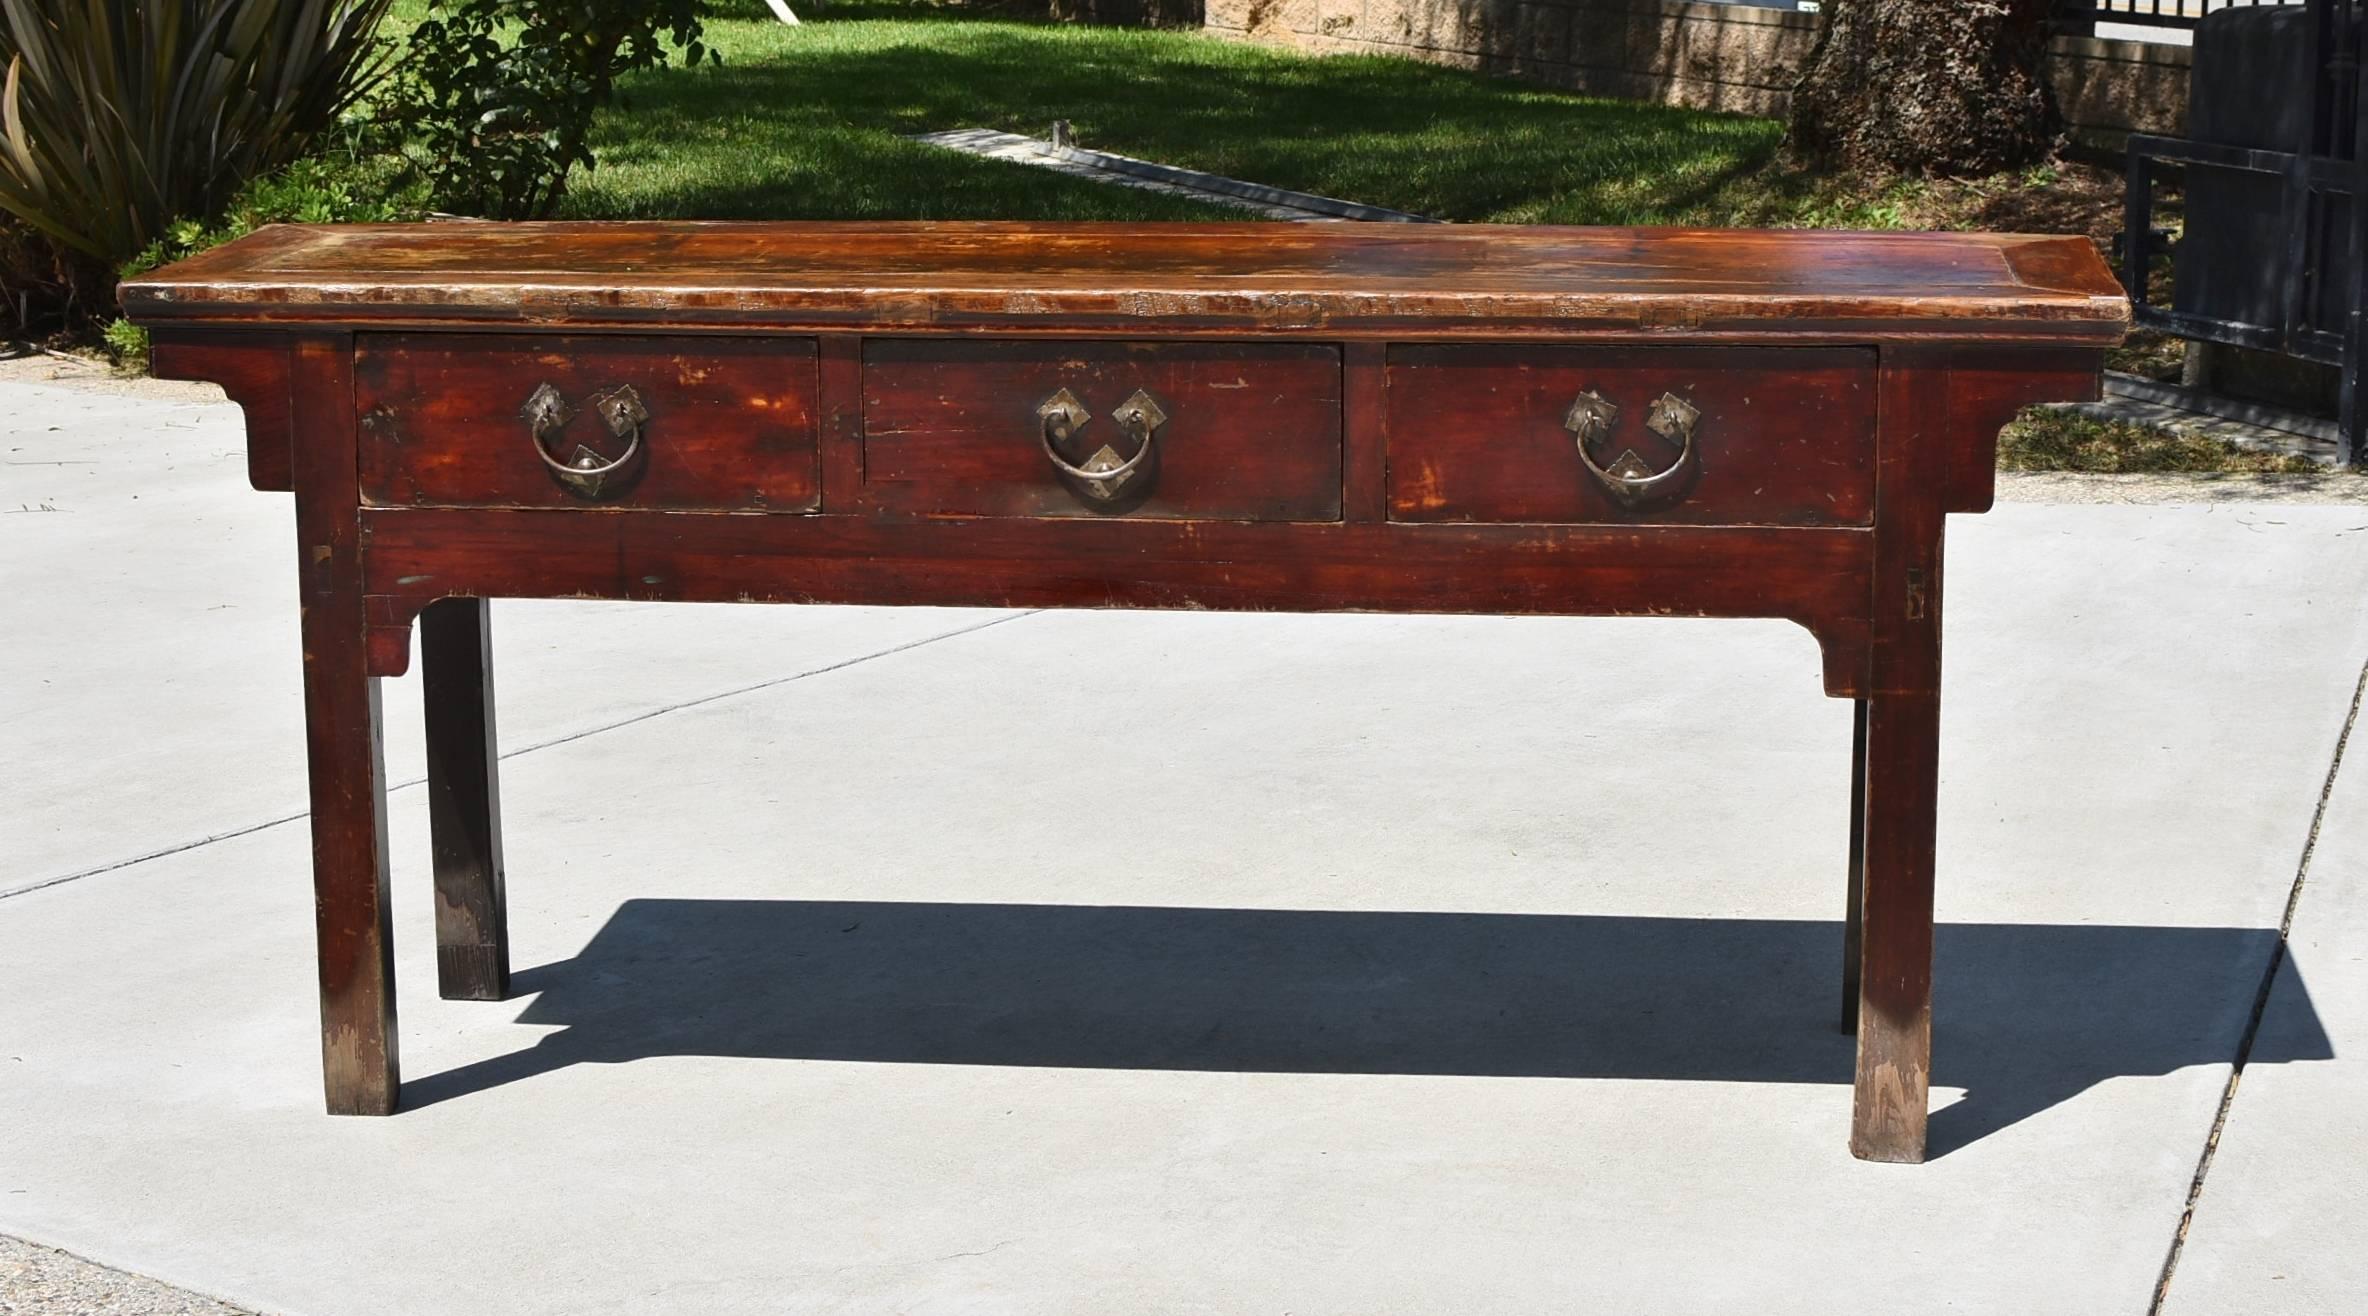 19th century table from northern China's Shan Xi province. The table has three full-length drawers. The tabletop used the ingenious 